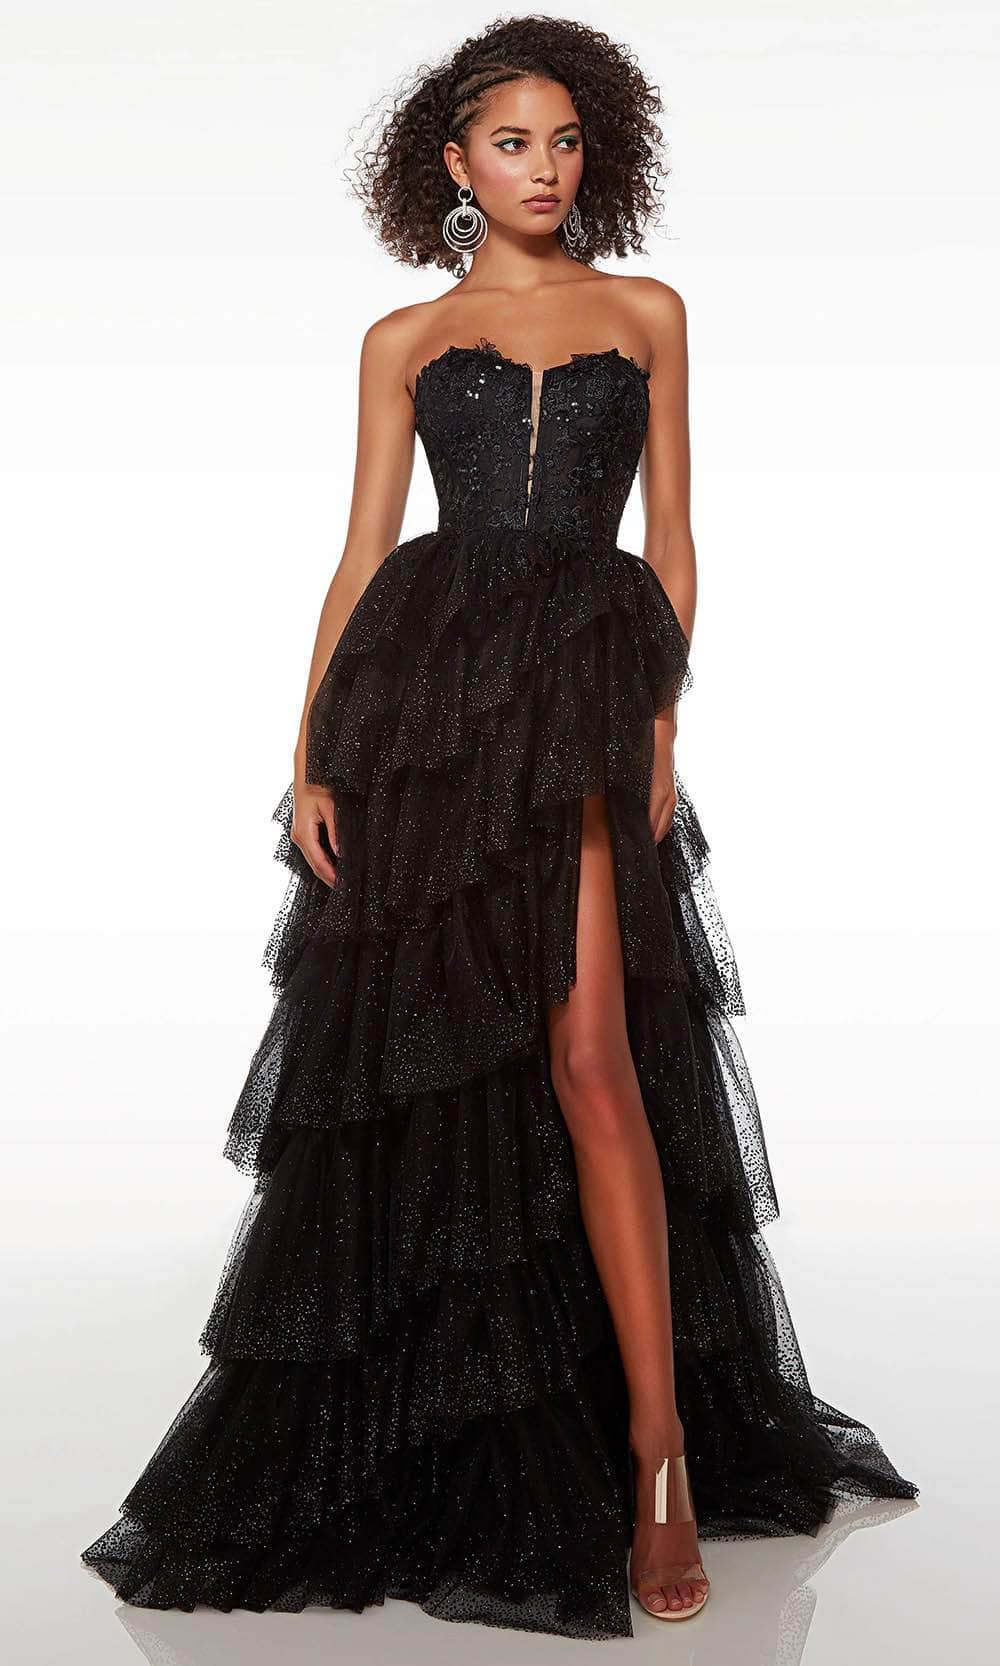 Image of Alyce Paris 61525 - Plunging Sweetheart Tiered Prom Gown